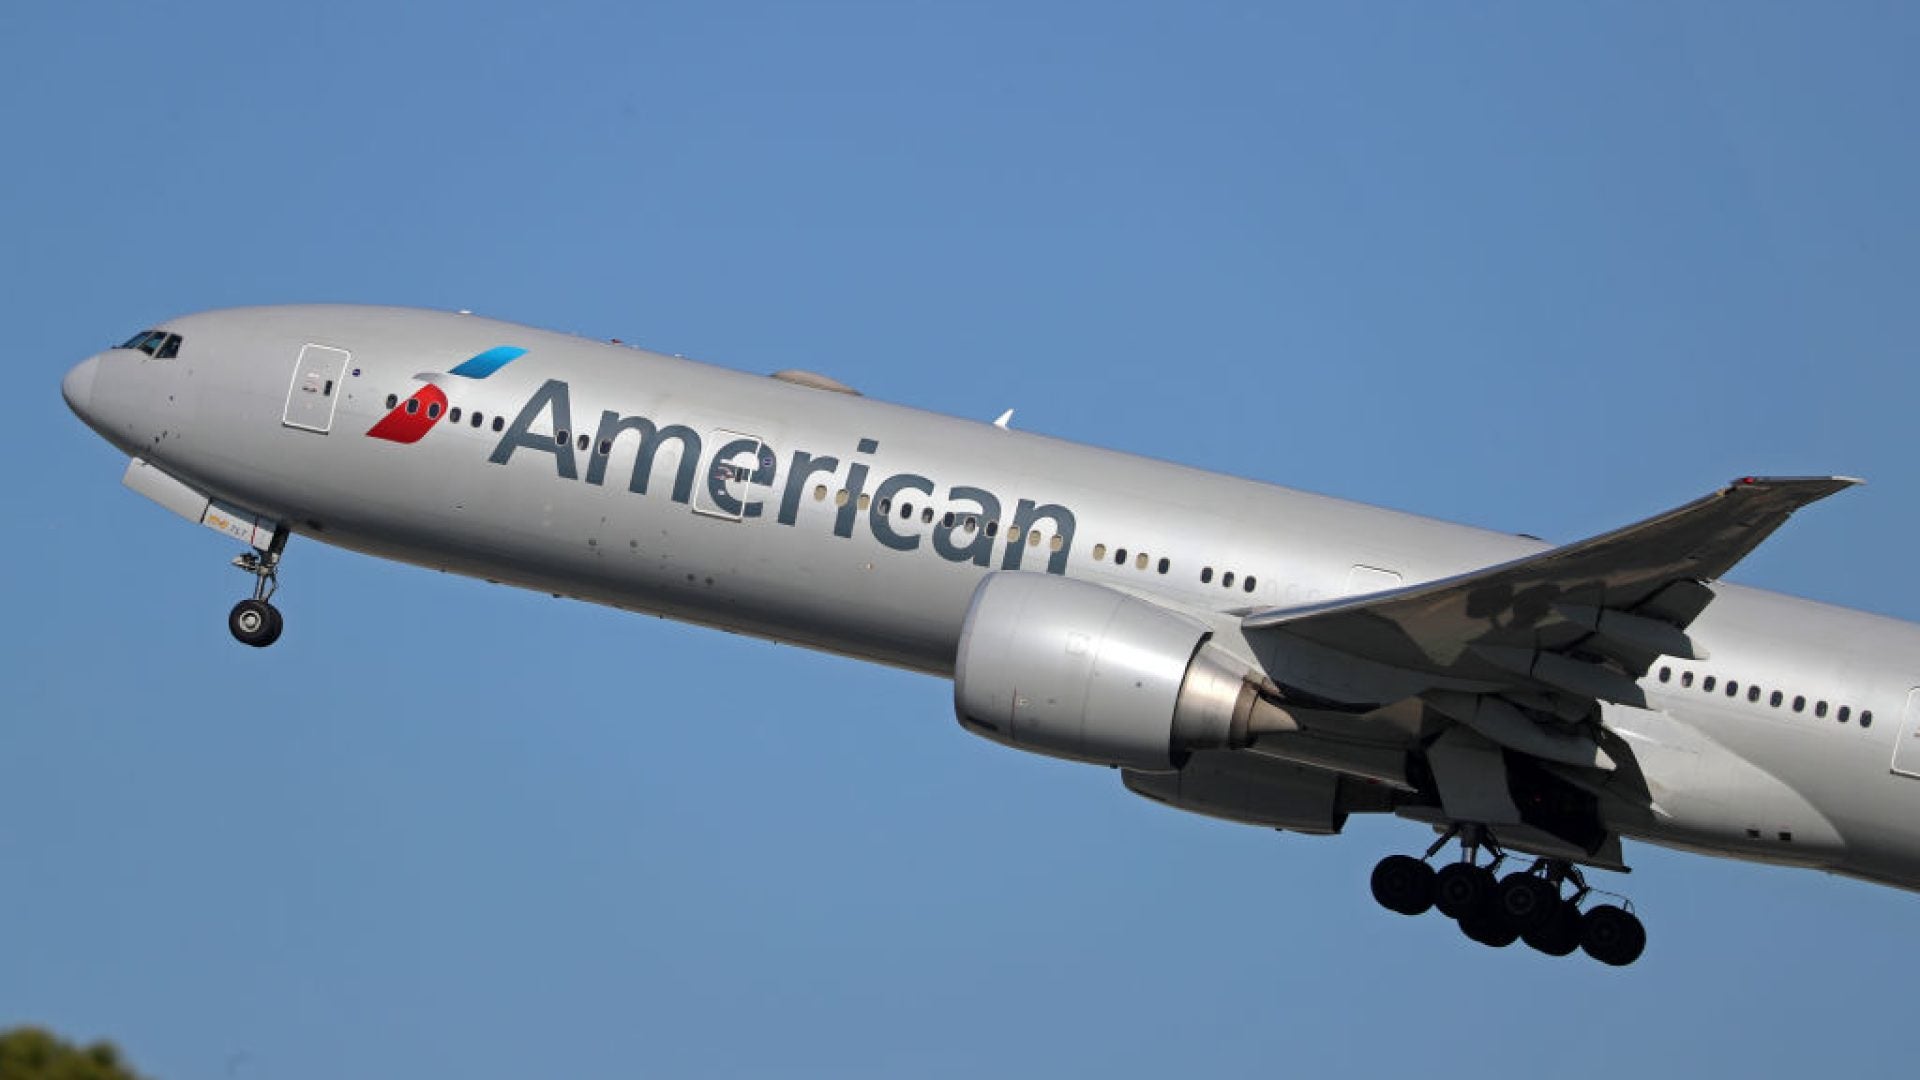 Three Black Men Sue American Airlines For Alleged Racial Discrimination After They Were Removed From Flight